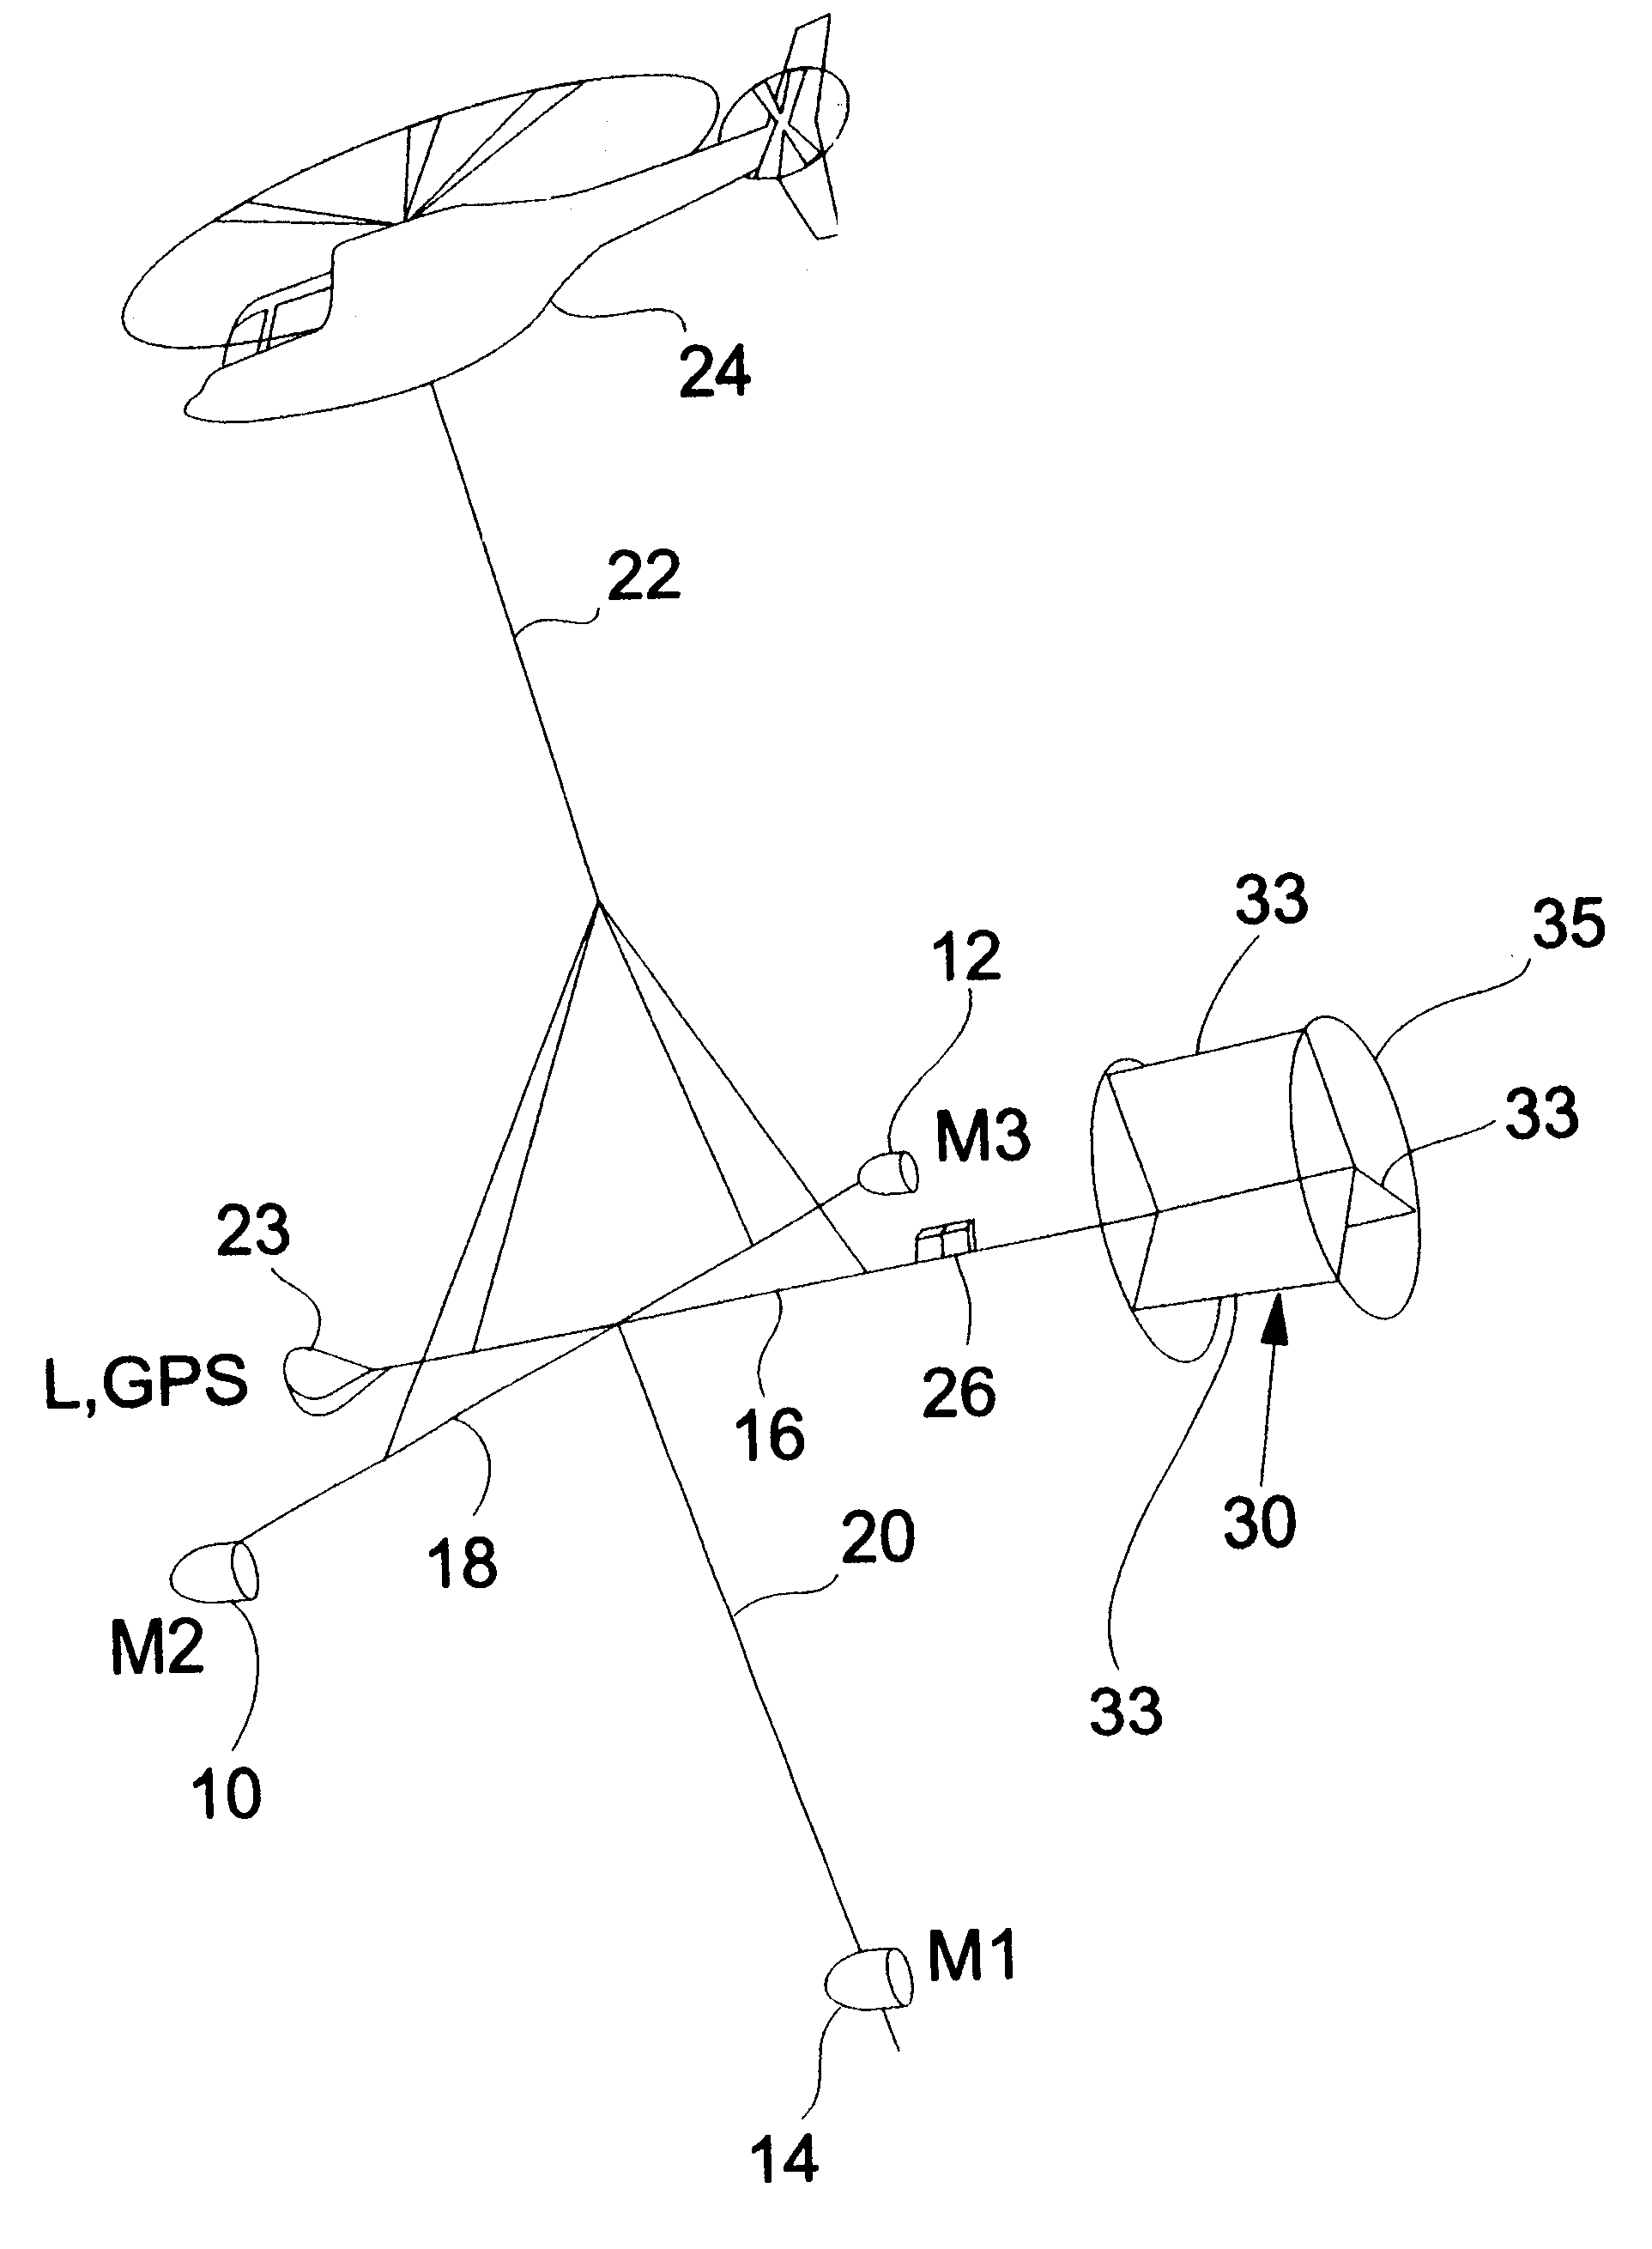 Method and apparatus for detecting, locating and resolving buried pipelines, cased wells and other ferrous objects